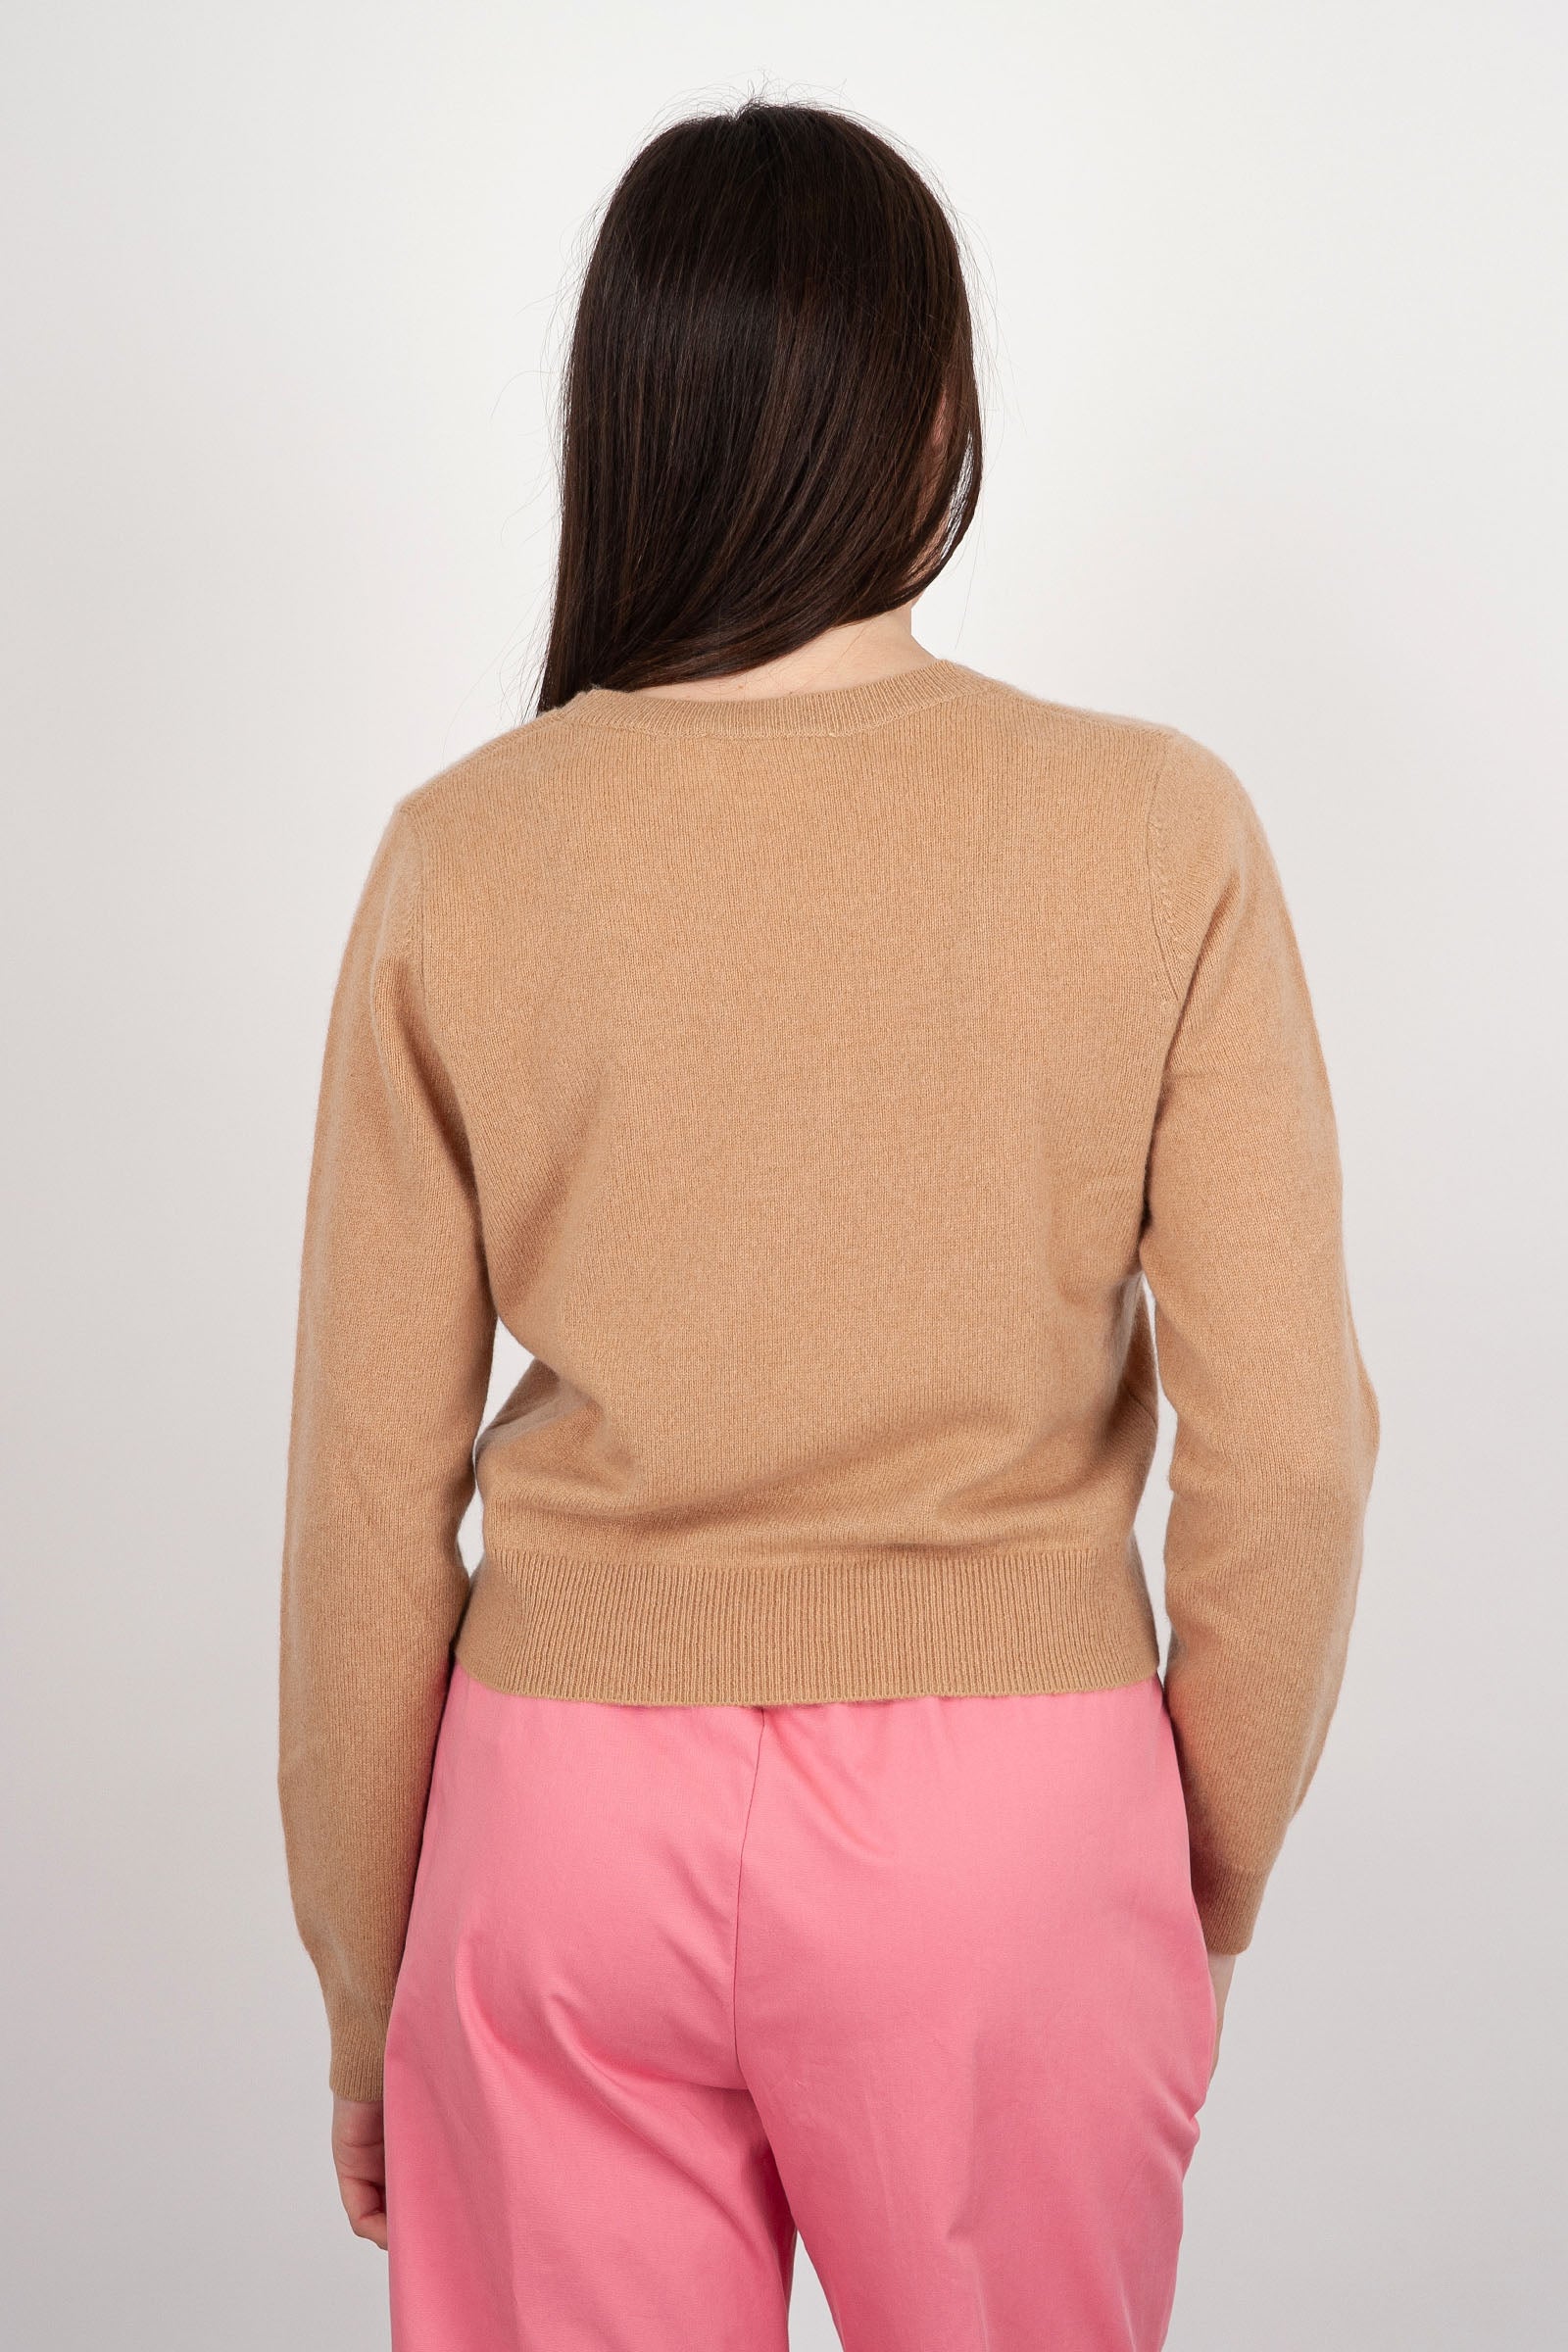 Absolut Cashmere Carlie Crew Neck Sweater in Sand Wool - 4